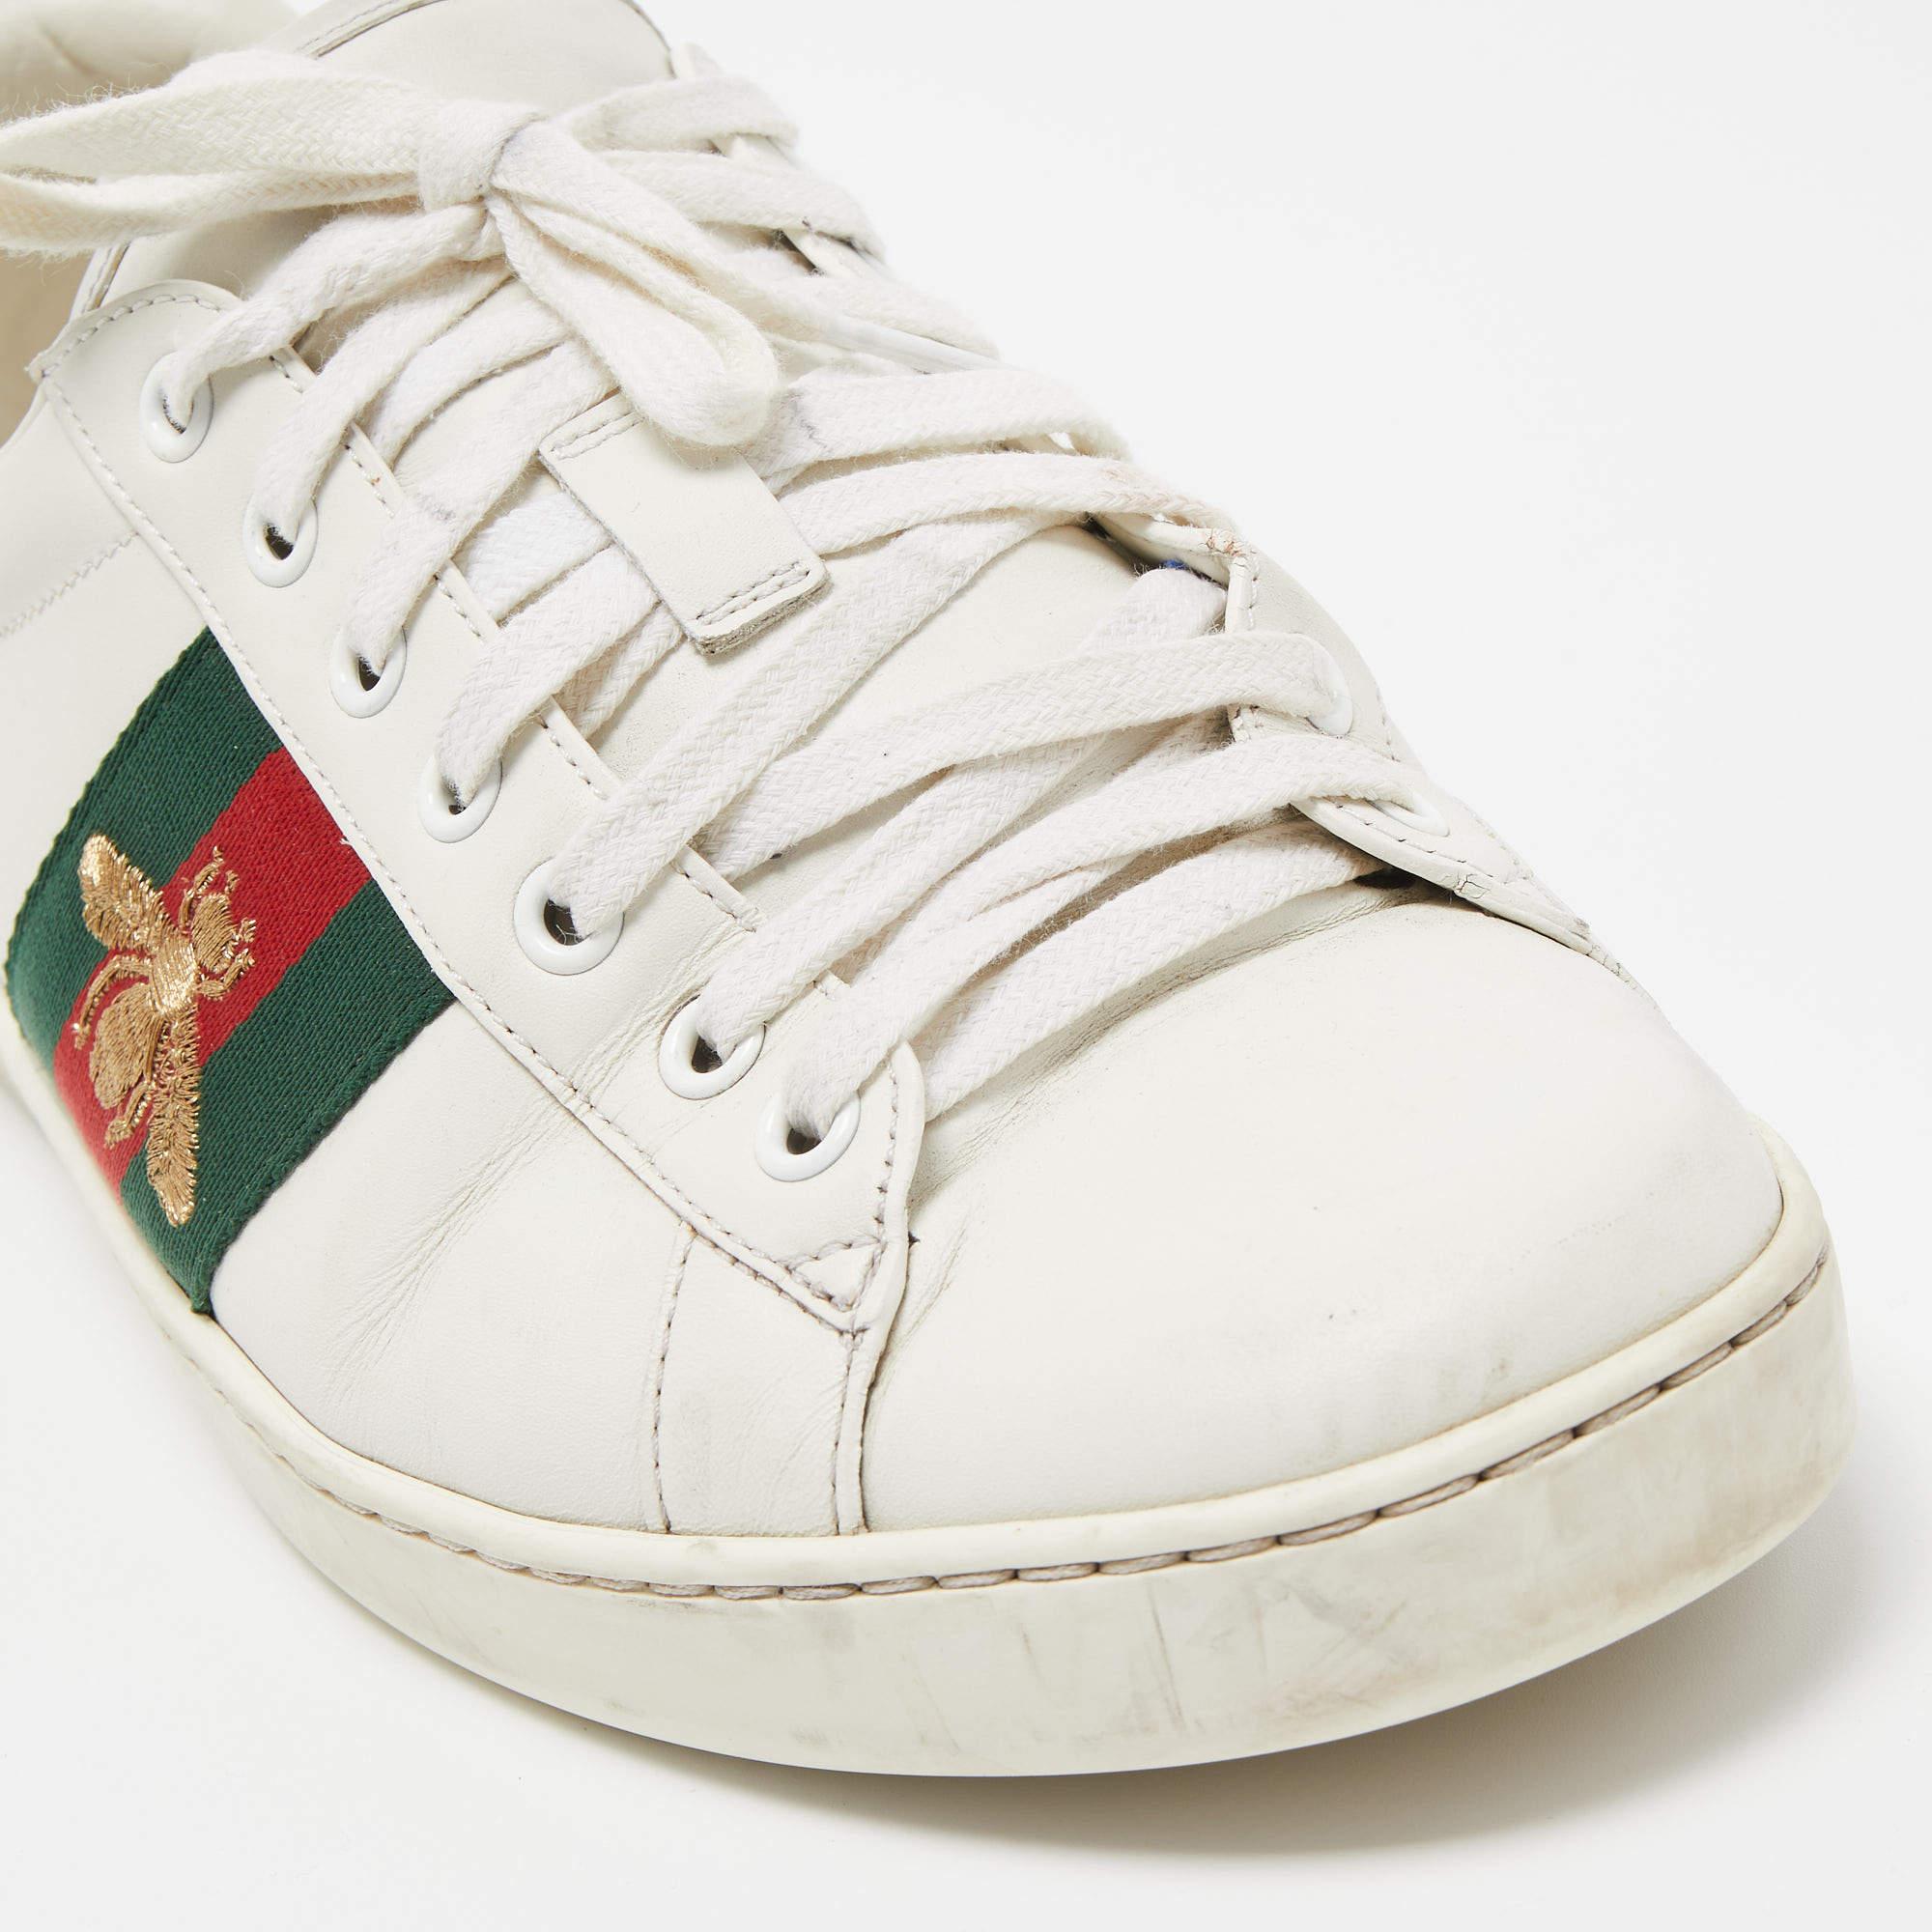 Gucci White Leather Embroidered Bee Ace Sneakers Size 43 For Sale 2